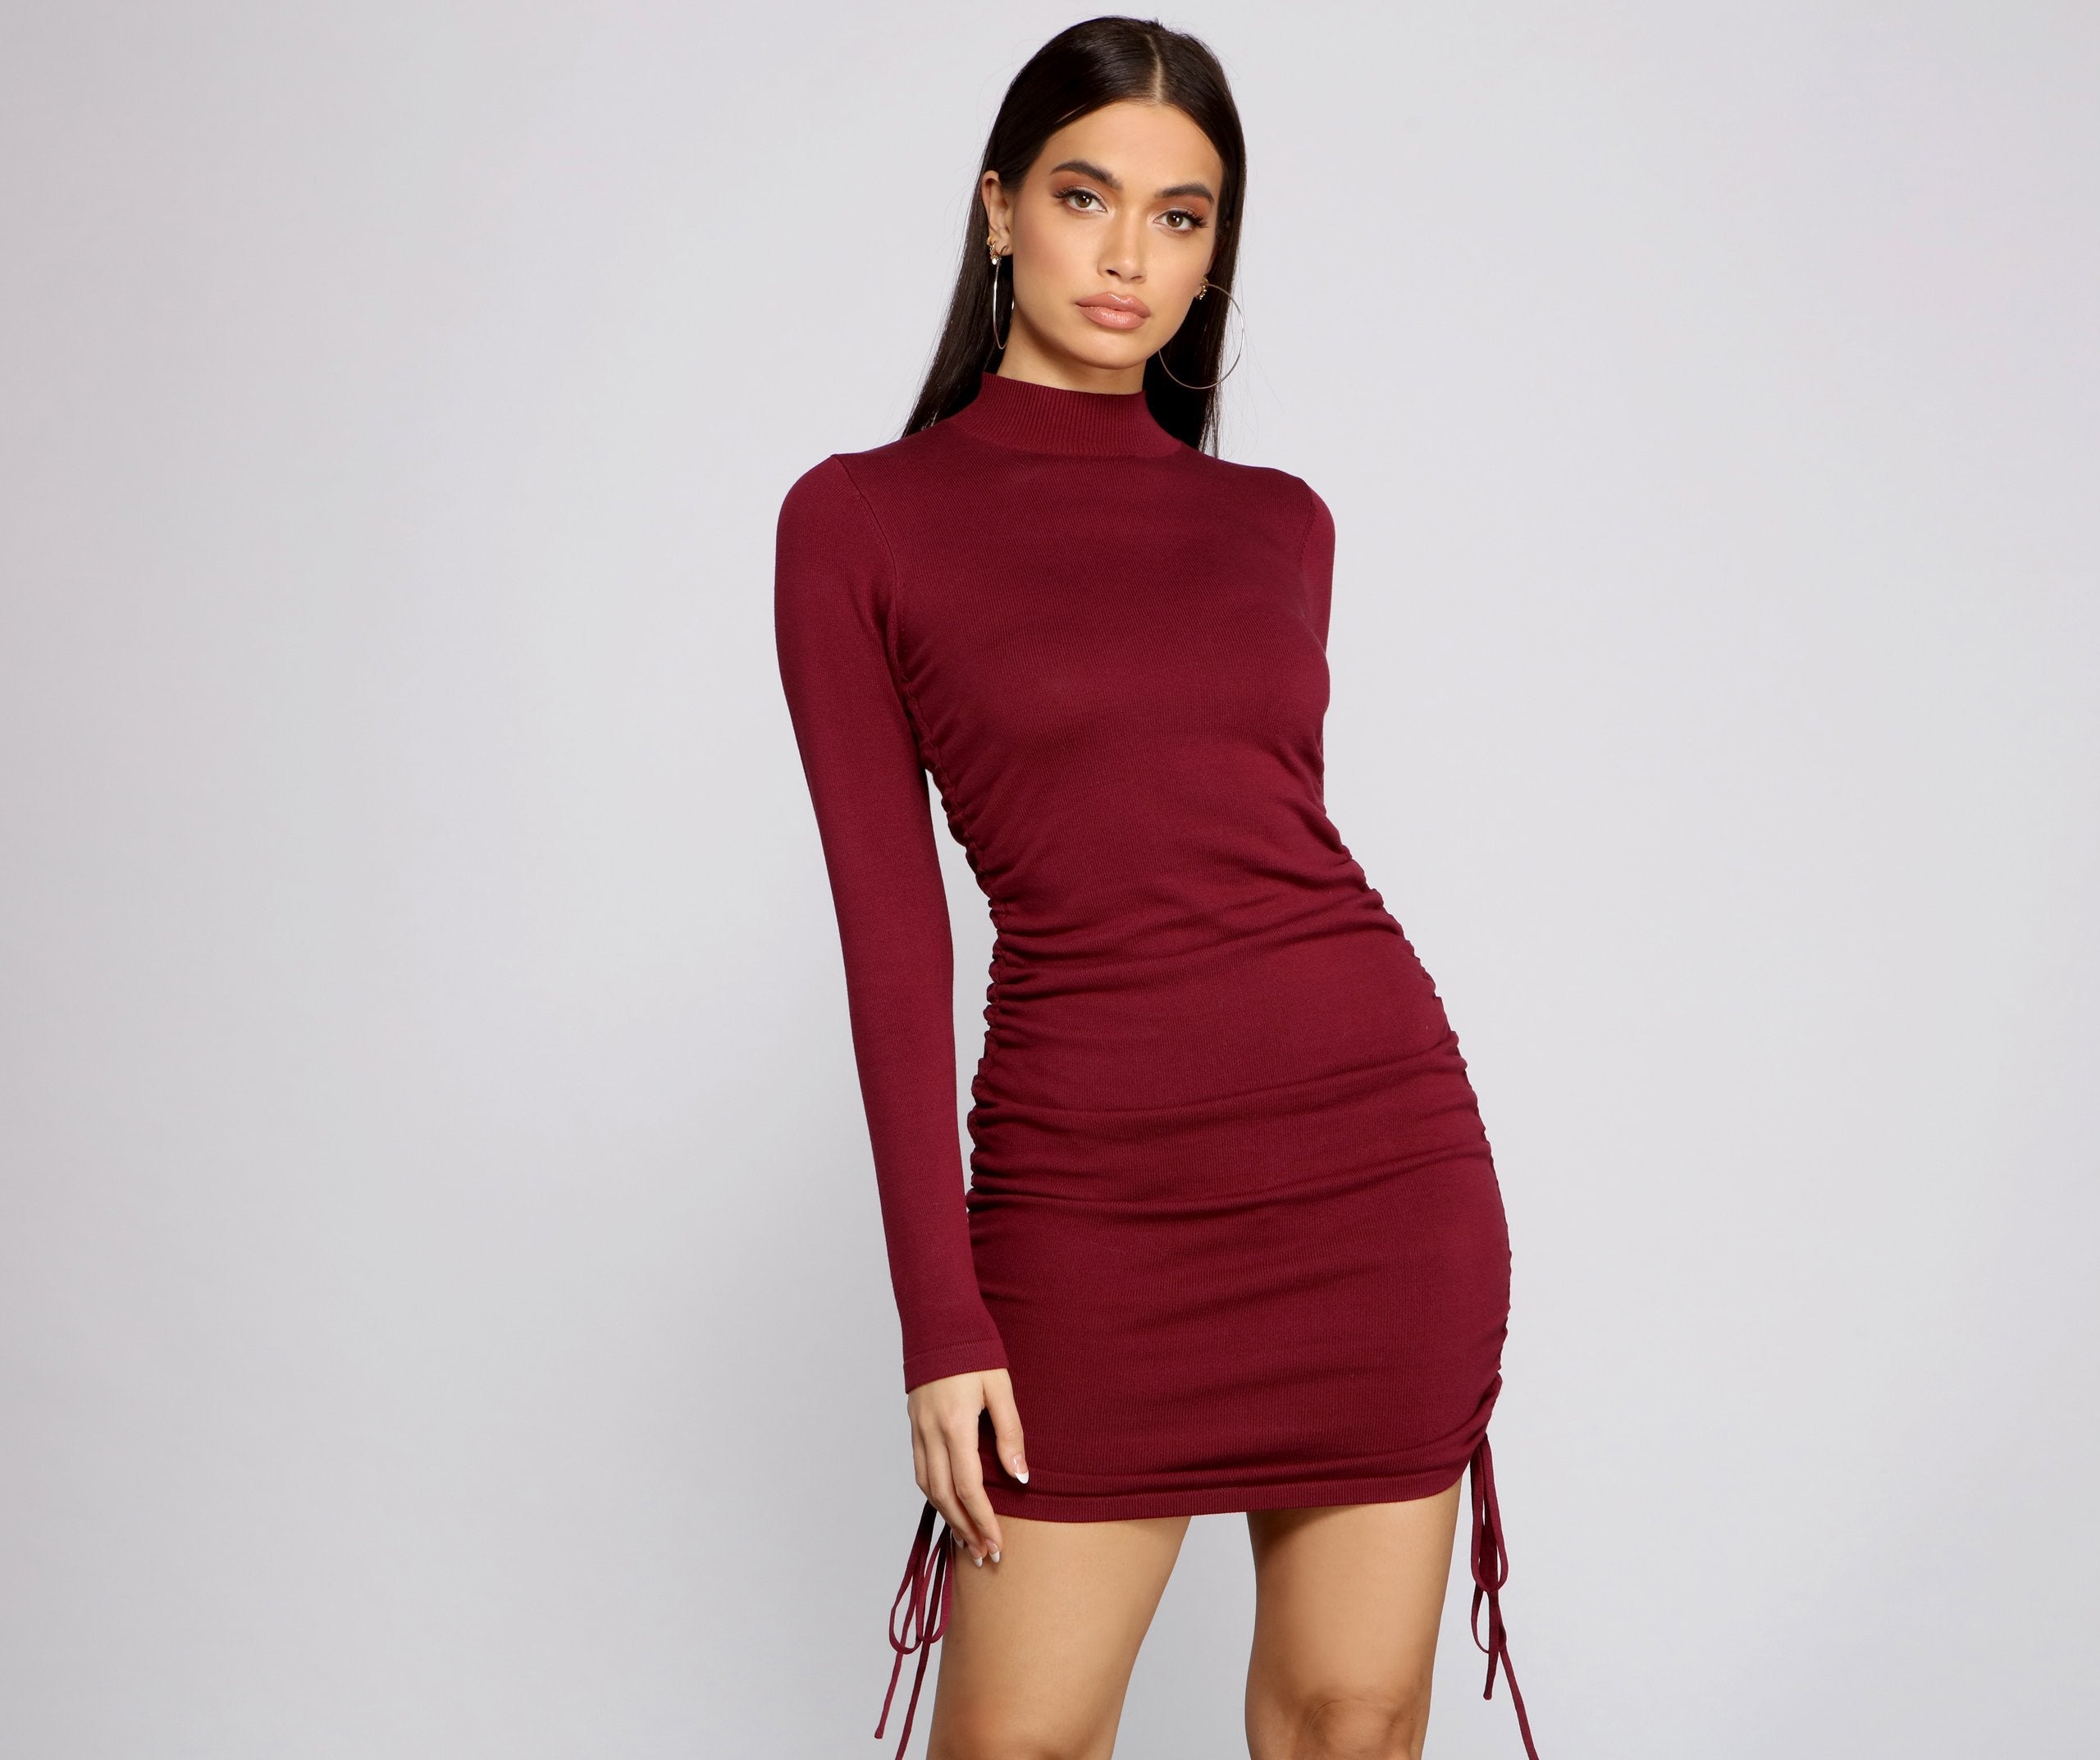 Keeping Knit Real Ruched Mini Dress - Lady Occasions